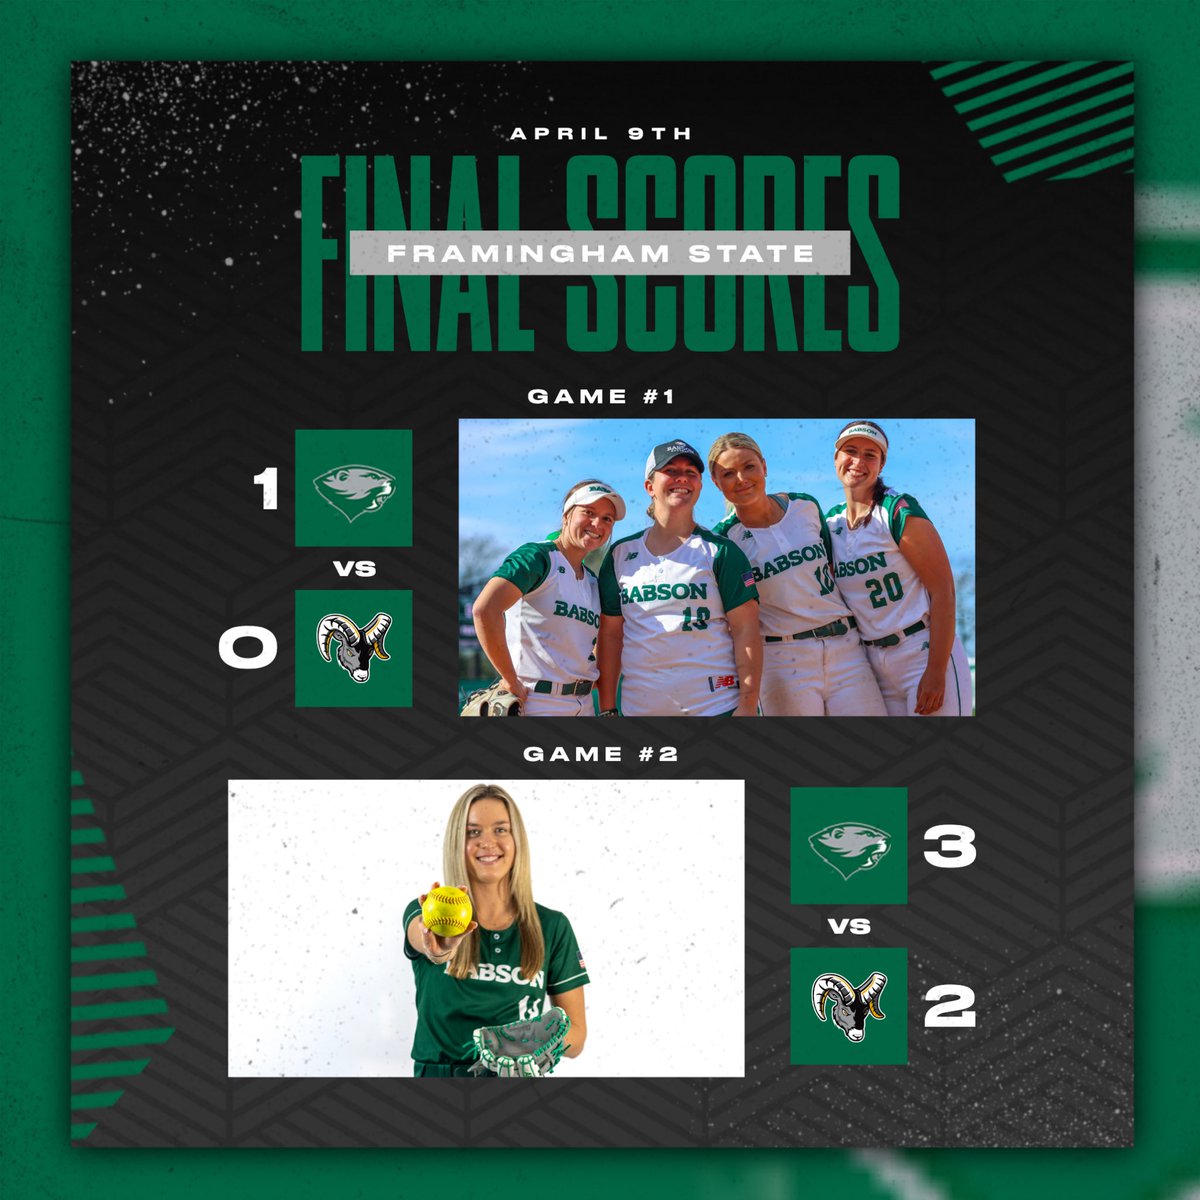 Break out the brooms 🧹🧹🧹 Beavers swept Framingham State in walk off fashion as Caroline Taylor came through with a HUGE 2RBI single in game 2! Great team wins! 

#GoBabo #StrictlyBusiness #EveryDamDay